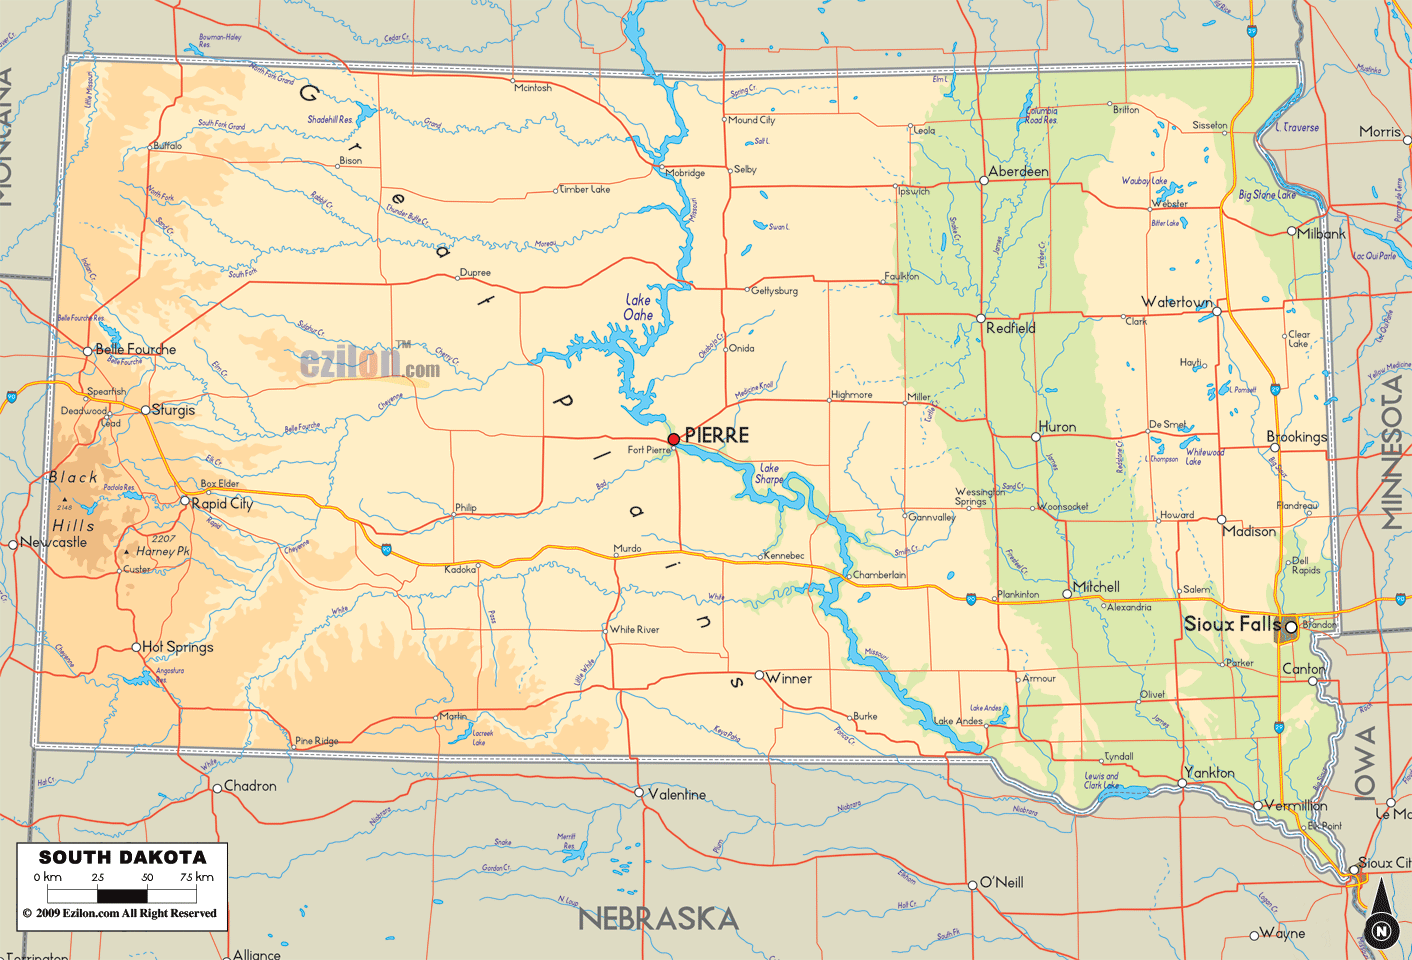 The Physical map of South Dakota State, USA showing major geographical features such as rivers, lakes, topography and land formations.